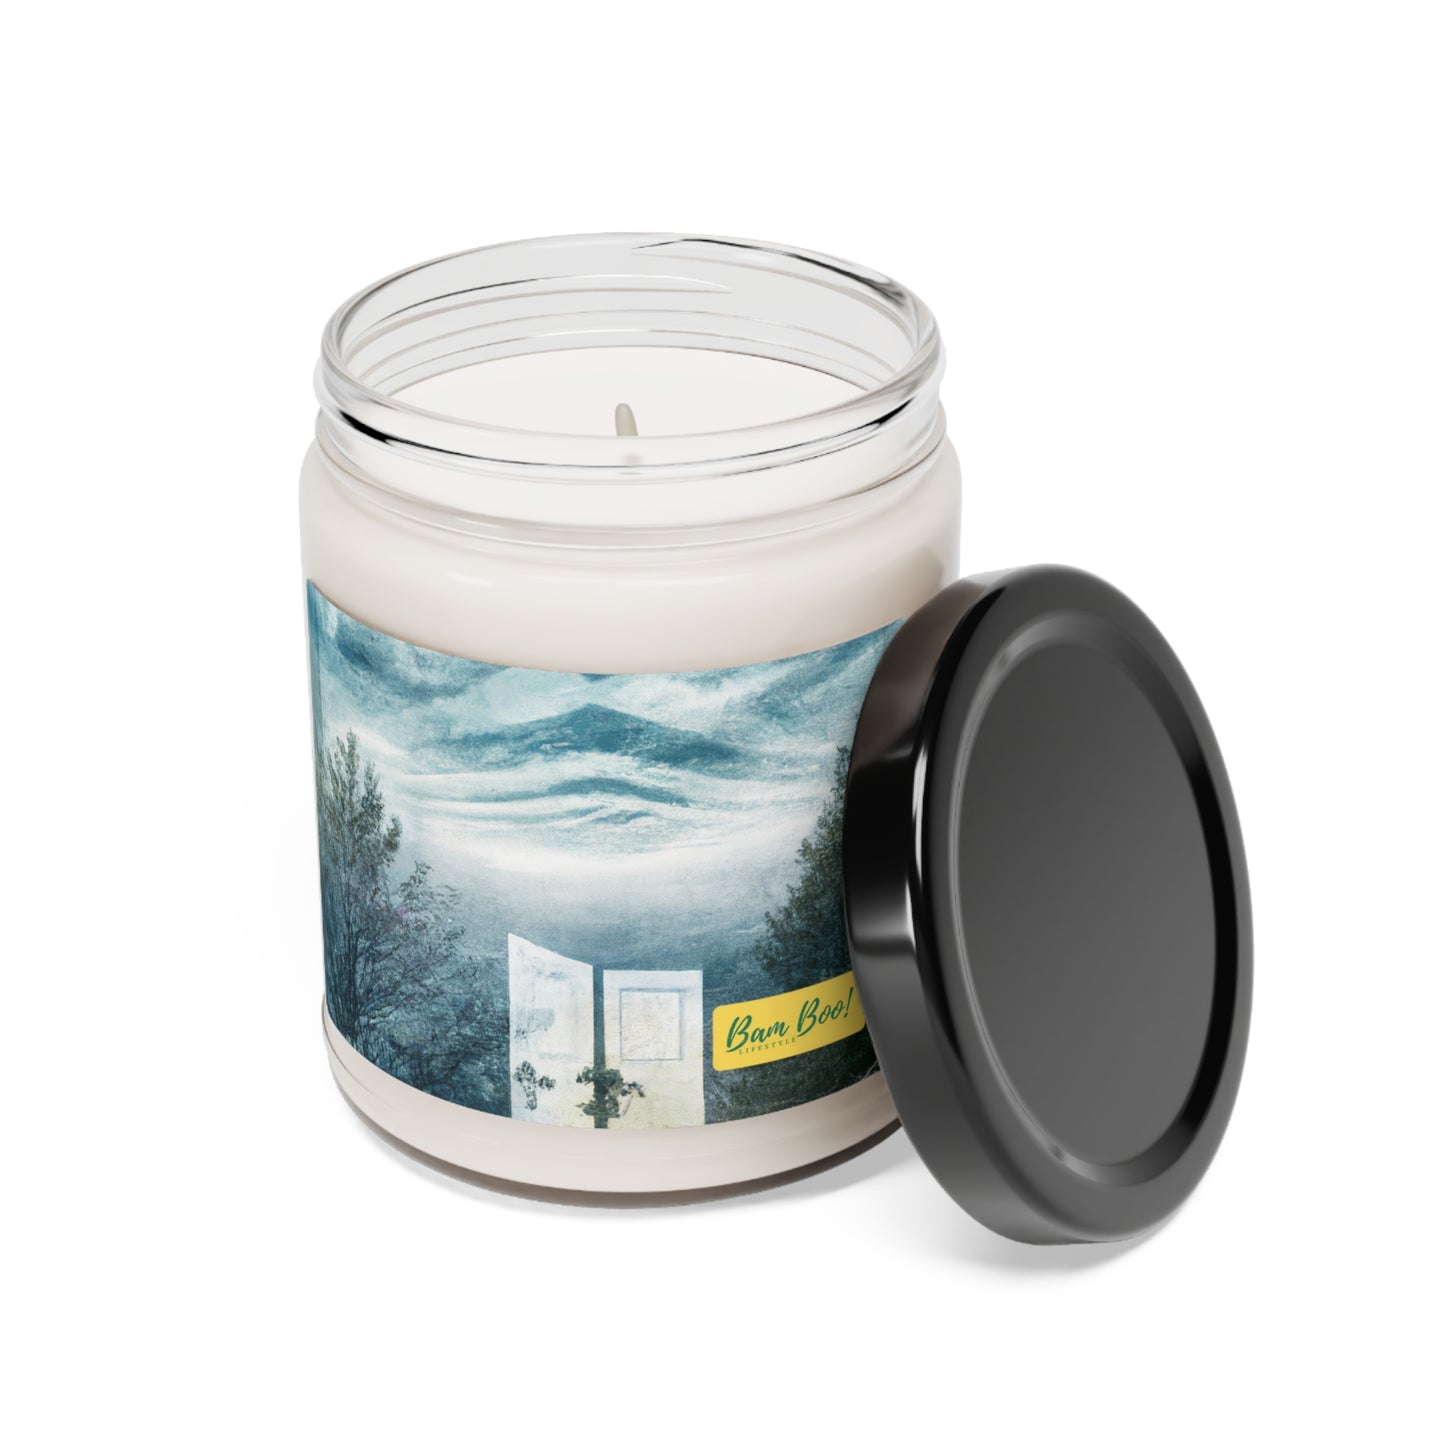 "Urban Naturelets: A Surreal Scene" - Bam Boo! Lifestyle Eco-friendly Soy Candle